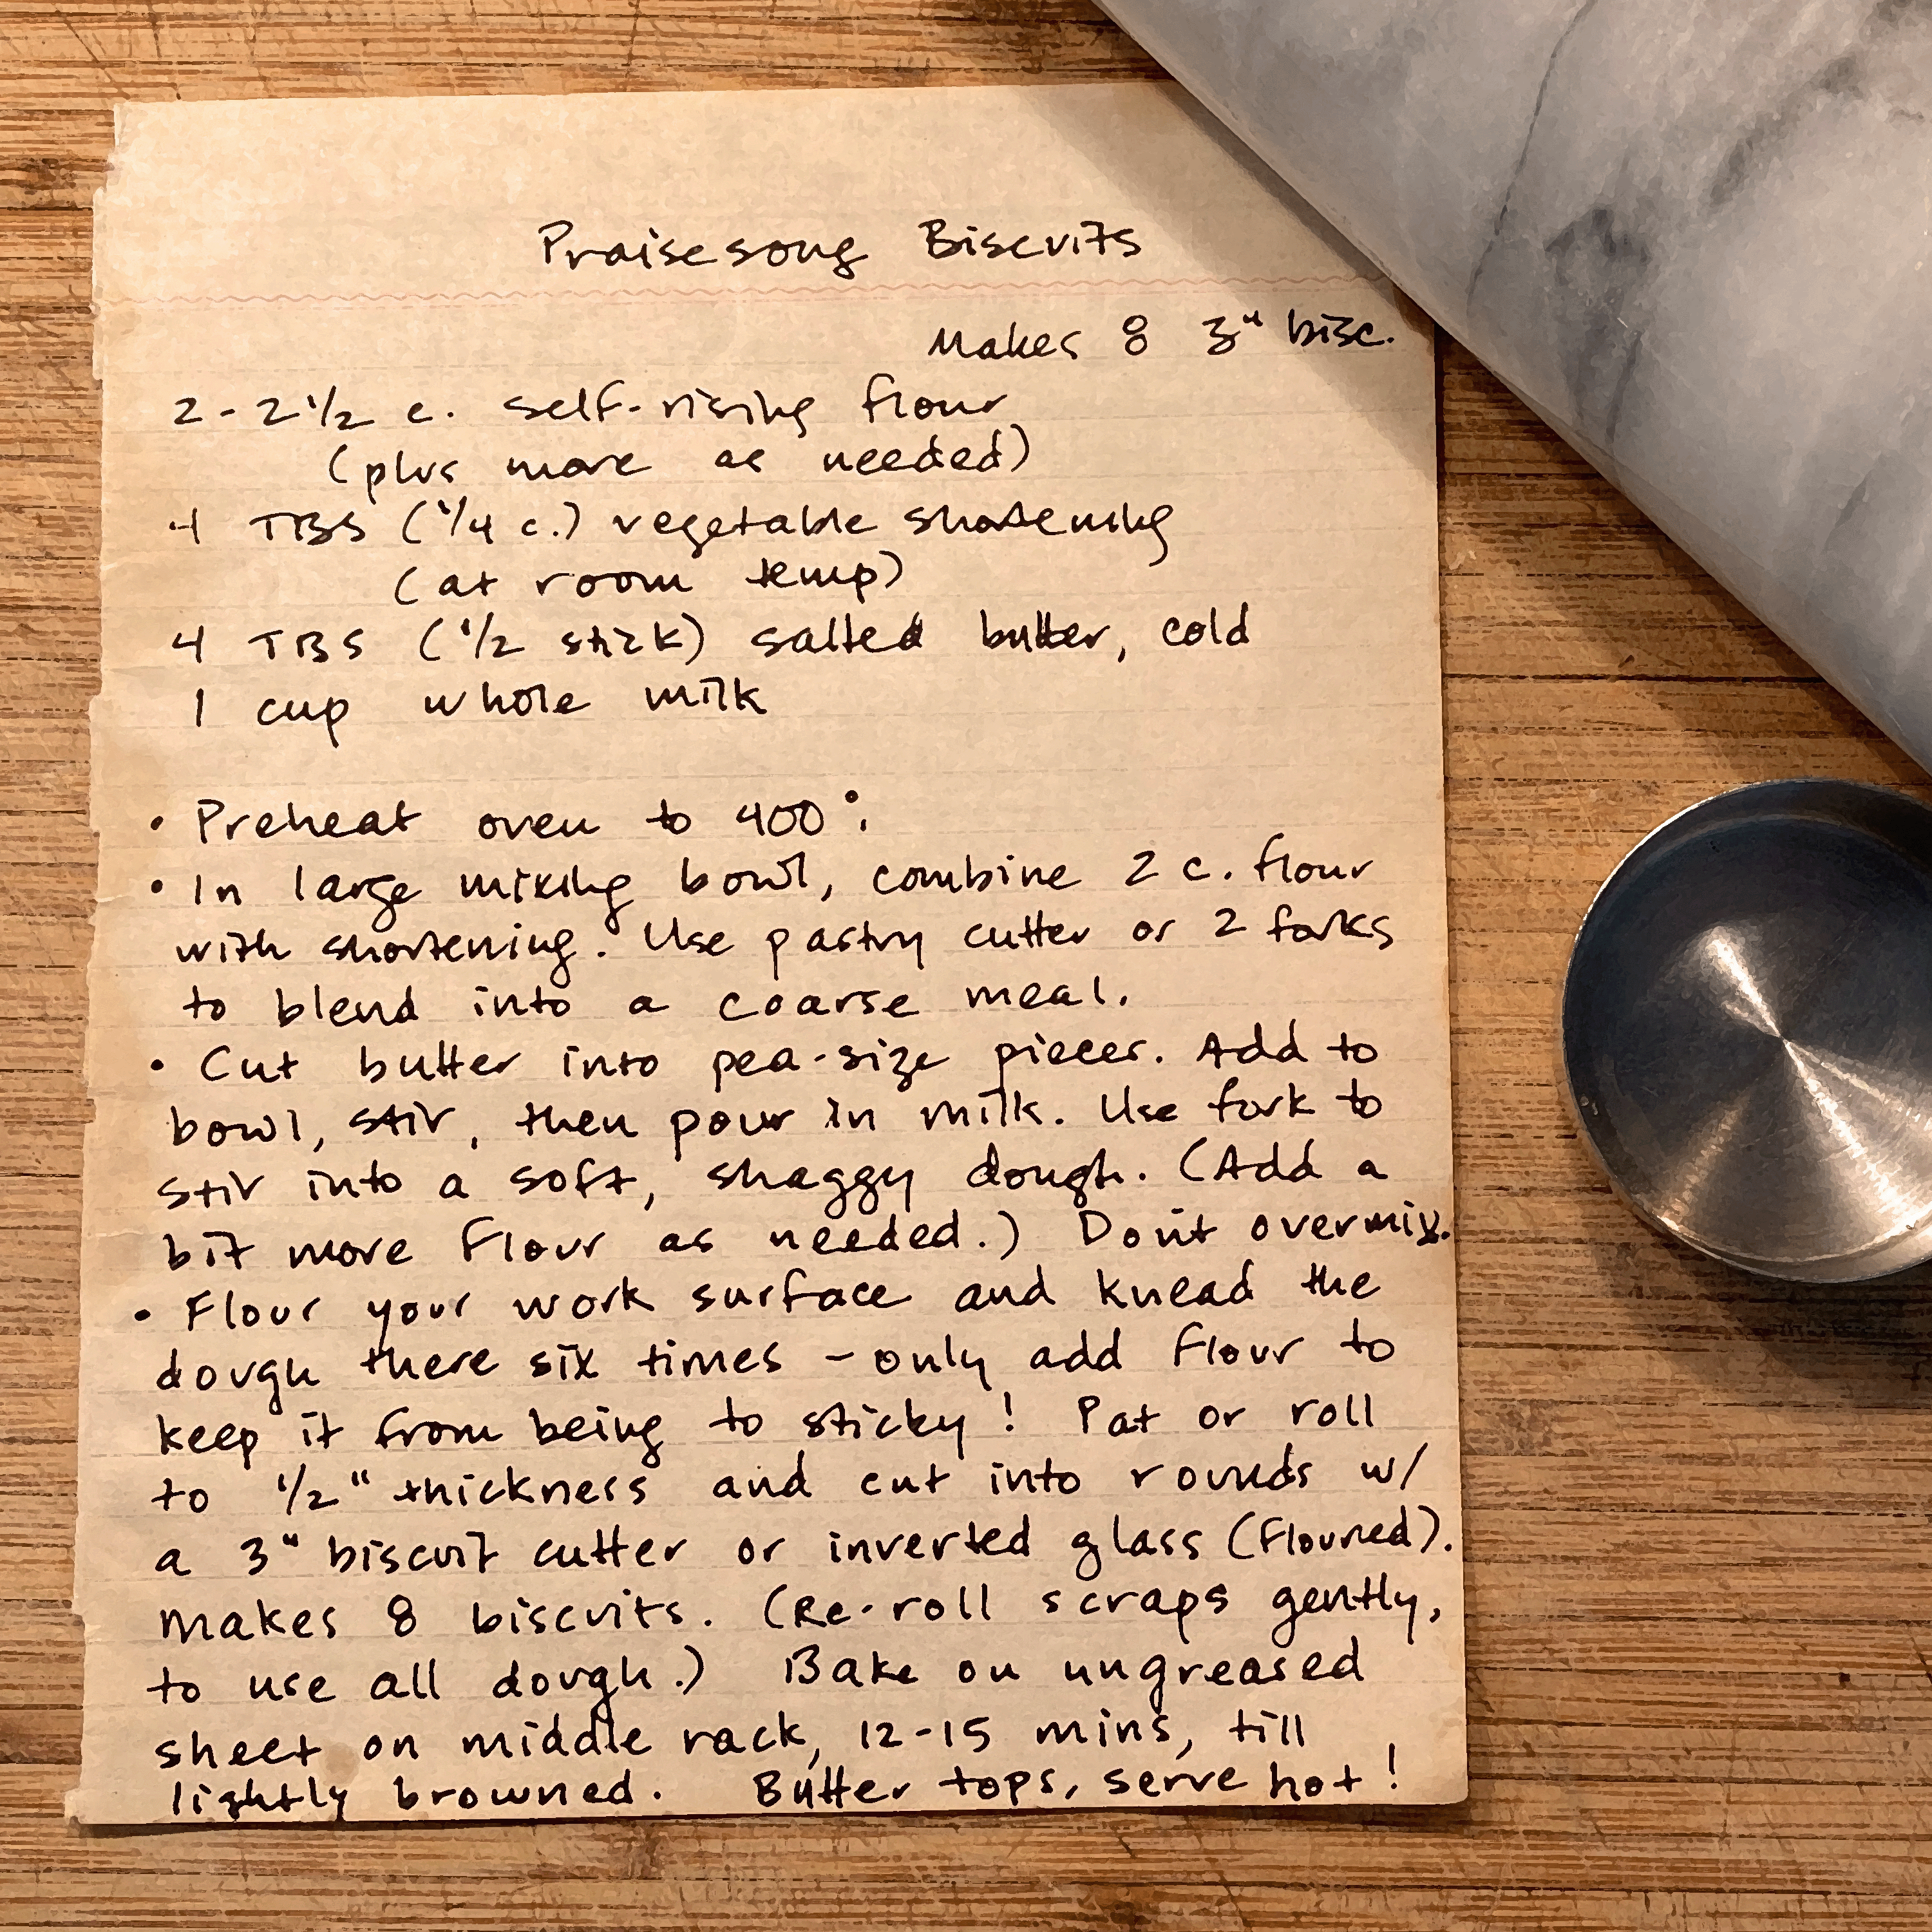 A recipe for biscuits. The full text can be found at the bottom of this article.